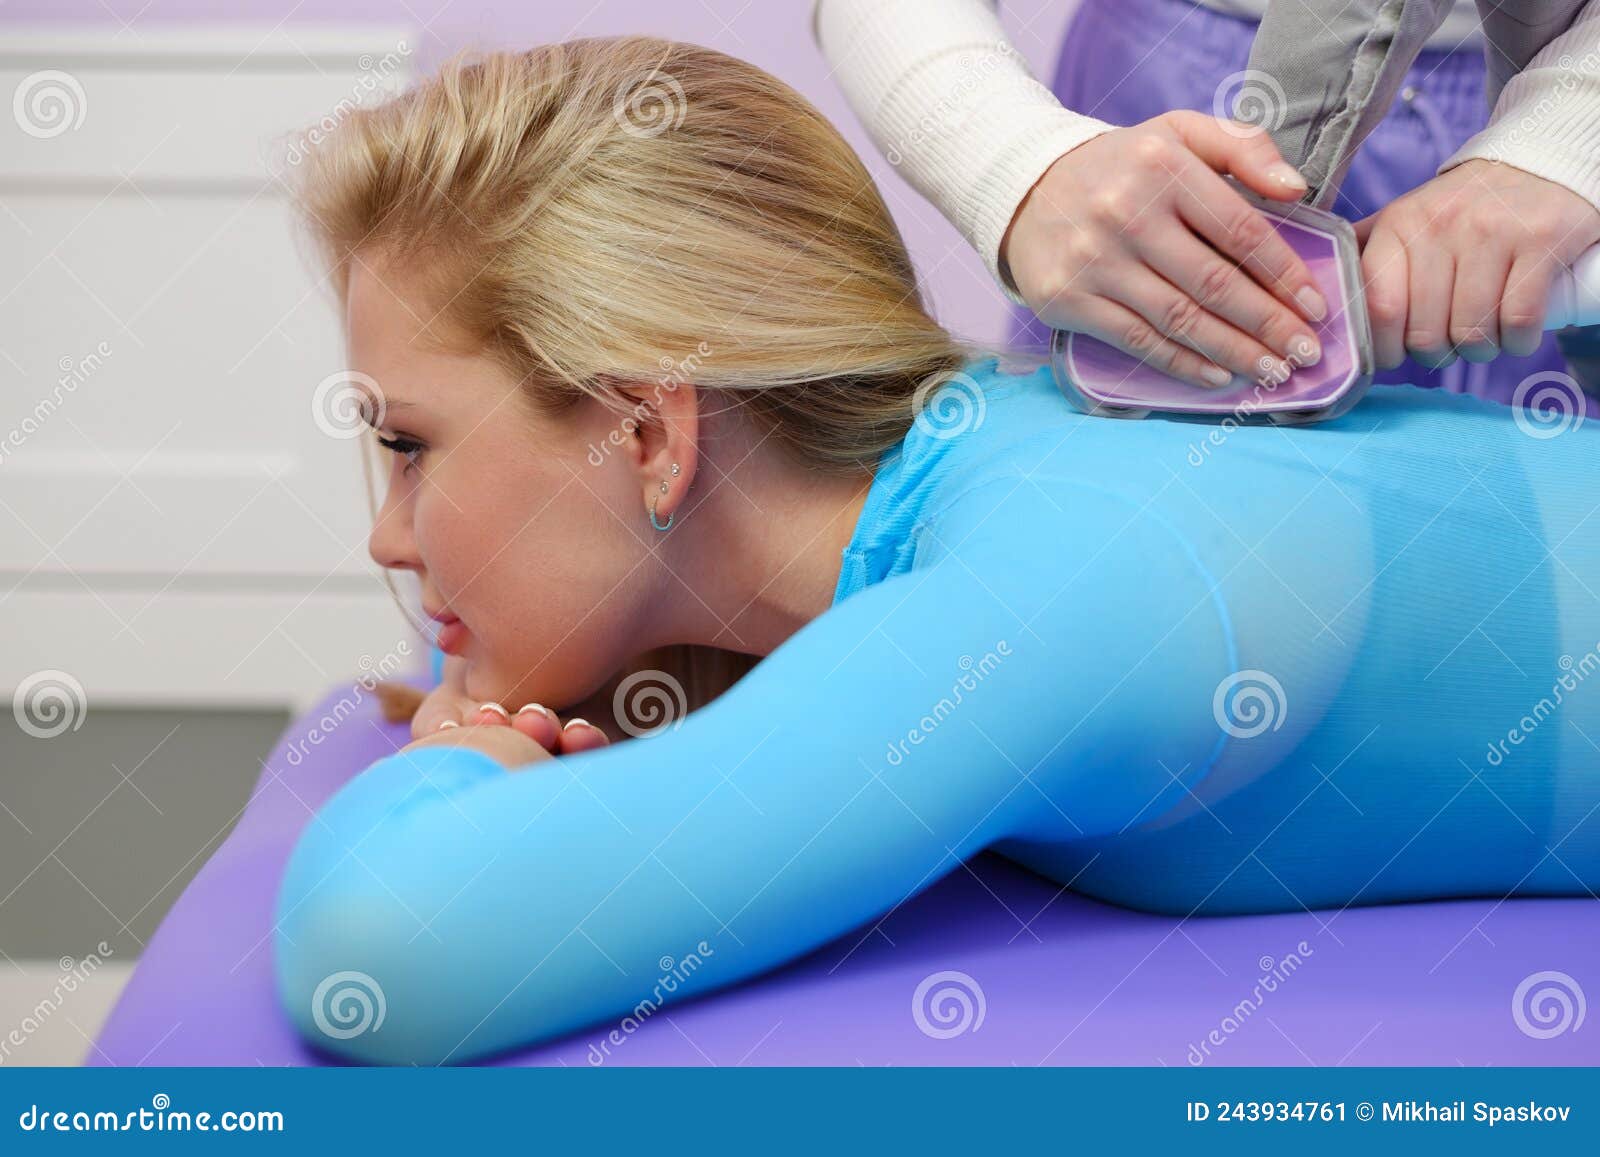 A Female Client Receives LPG Massage in Beauty Clinic. Parlour. Blue Suit. Lilac Background. Stock Image - Image of medical, female: 243934761